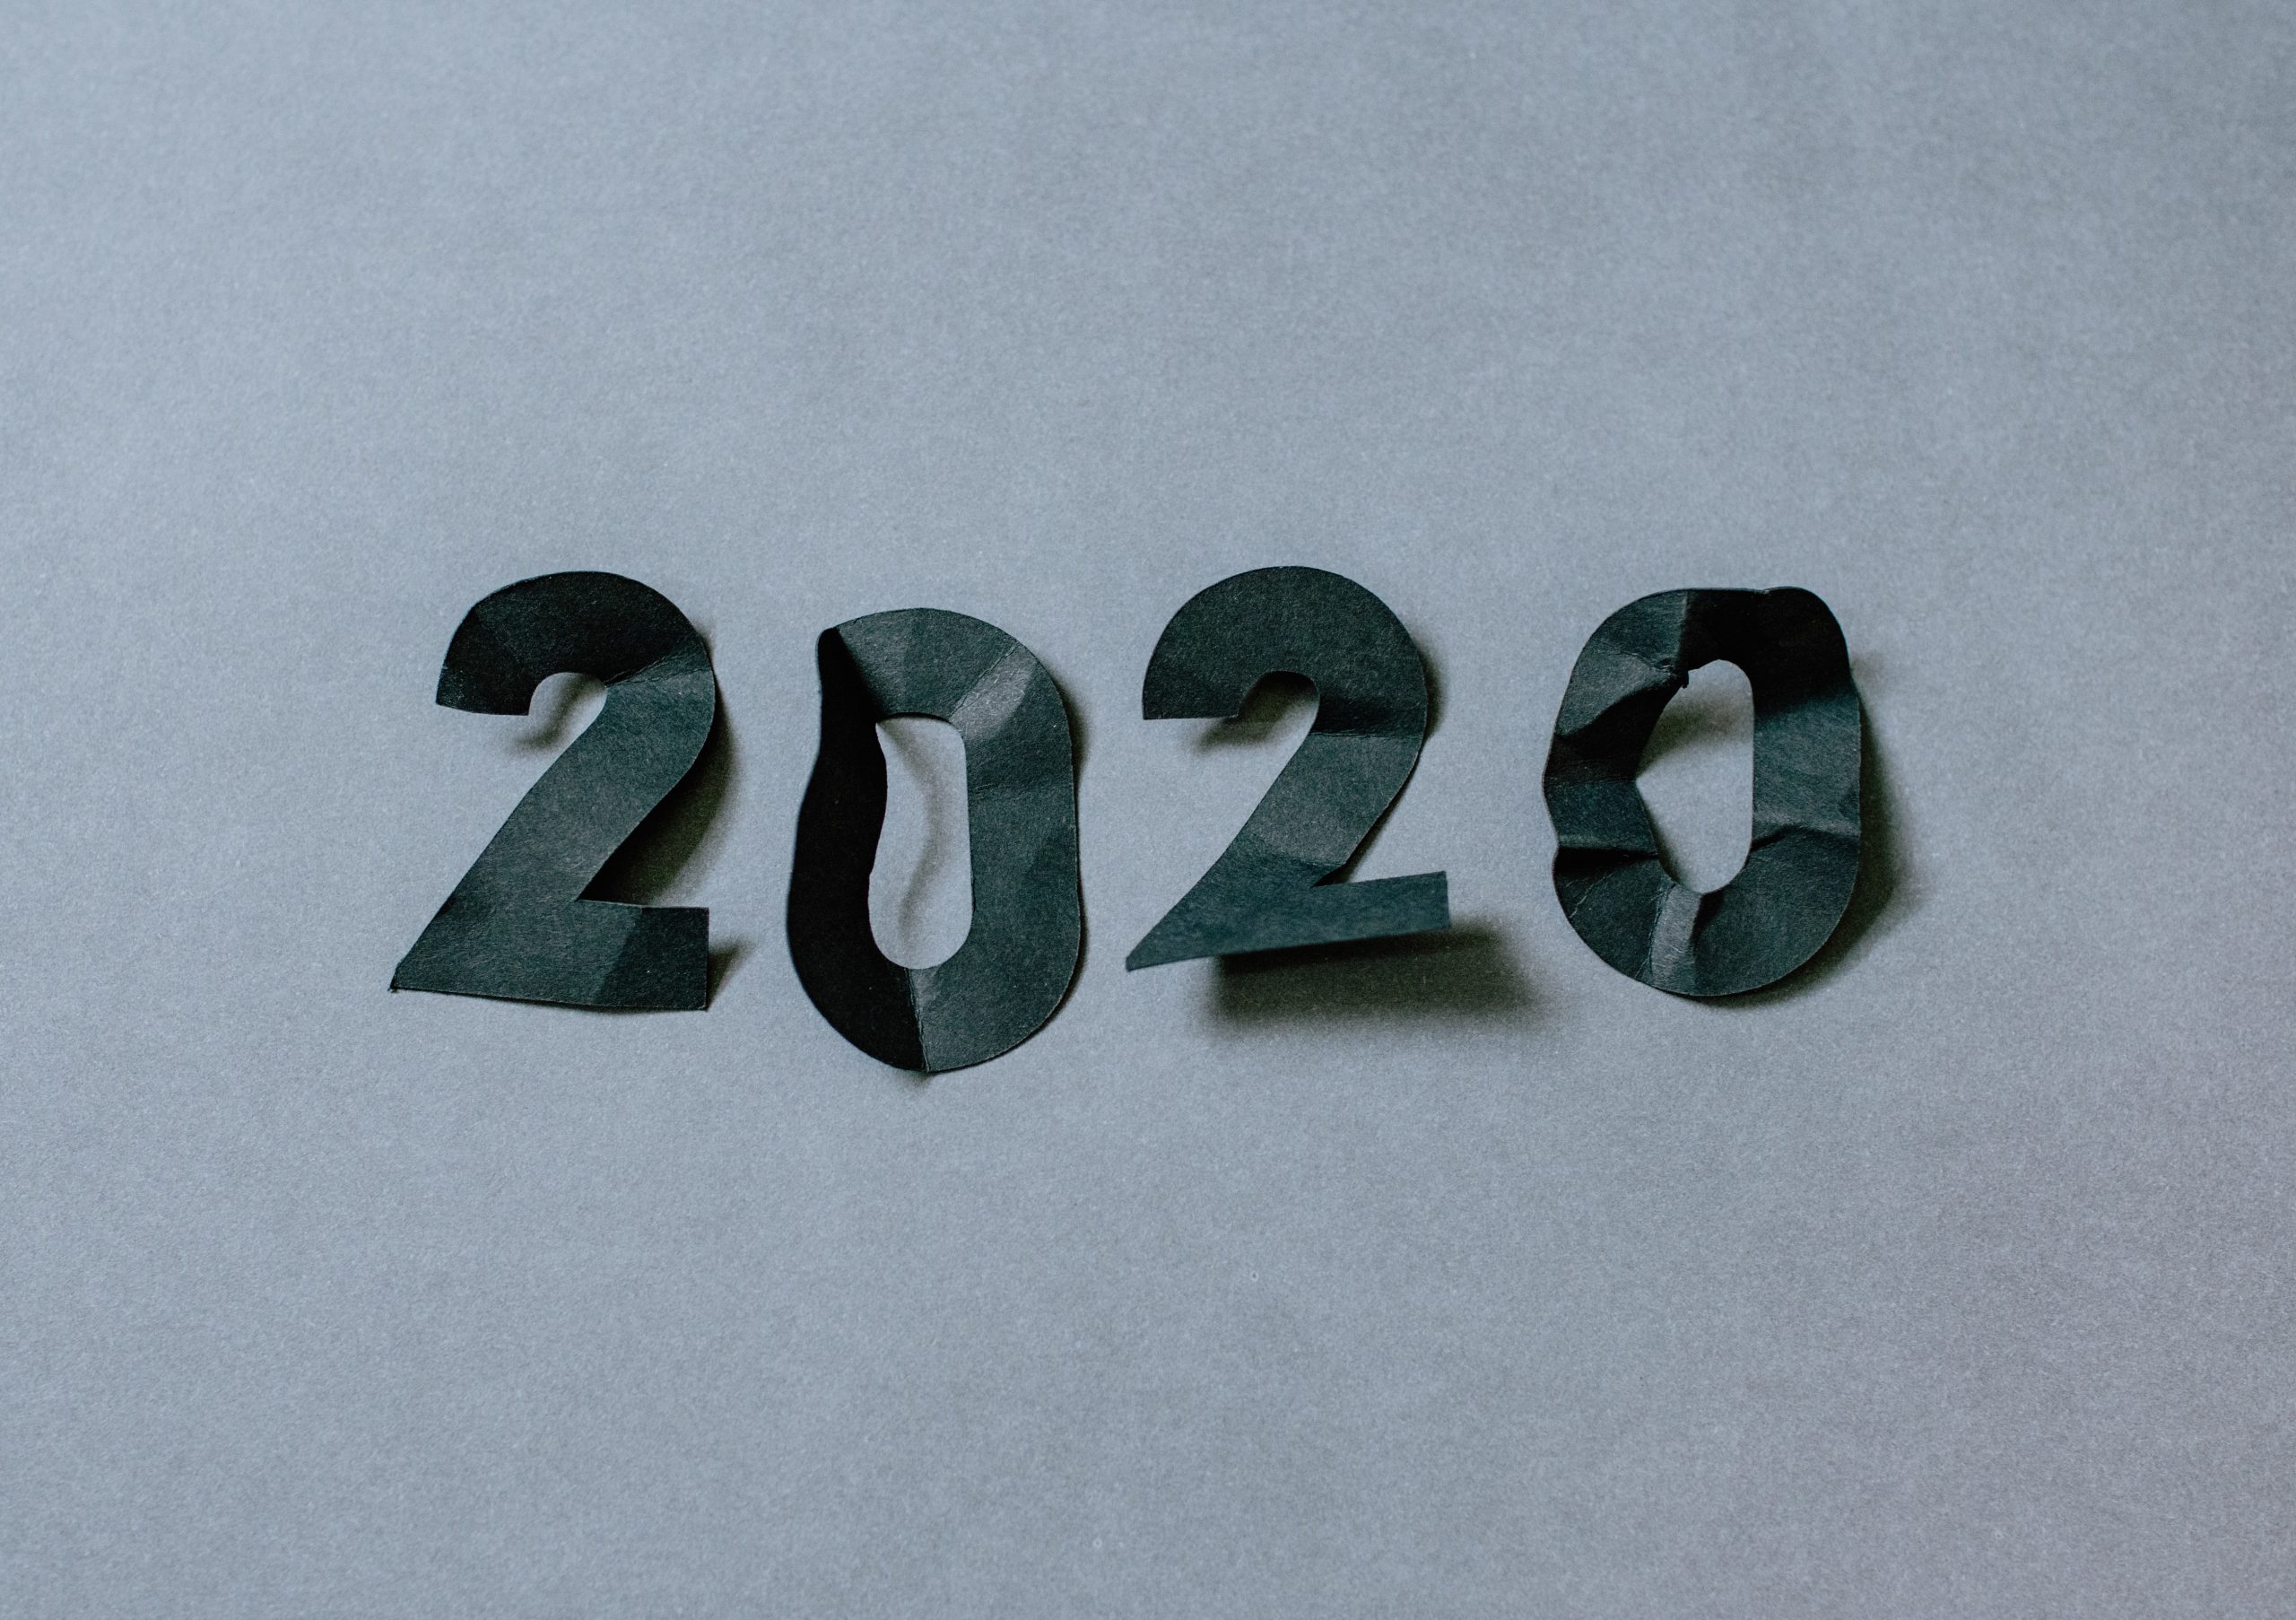 my new year's resolution for 2021 - rewind 2020